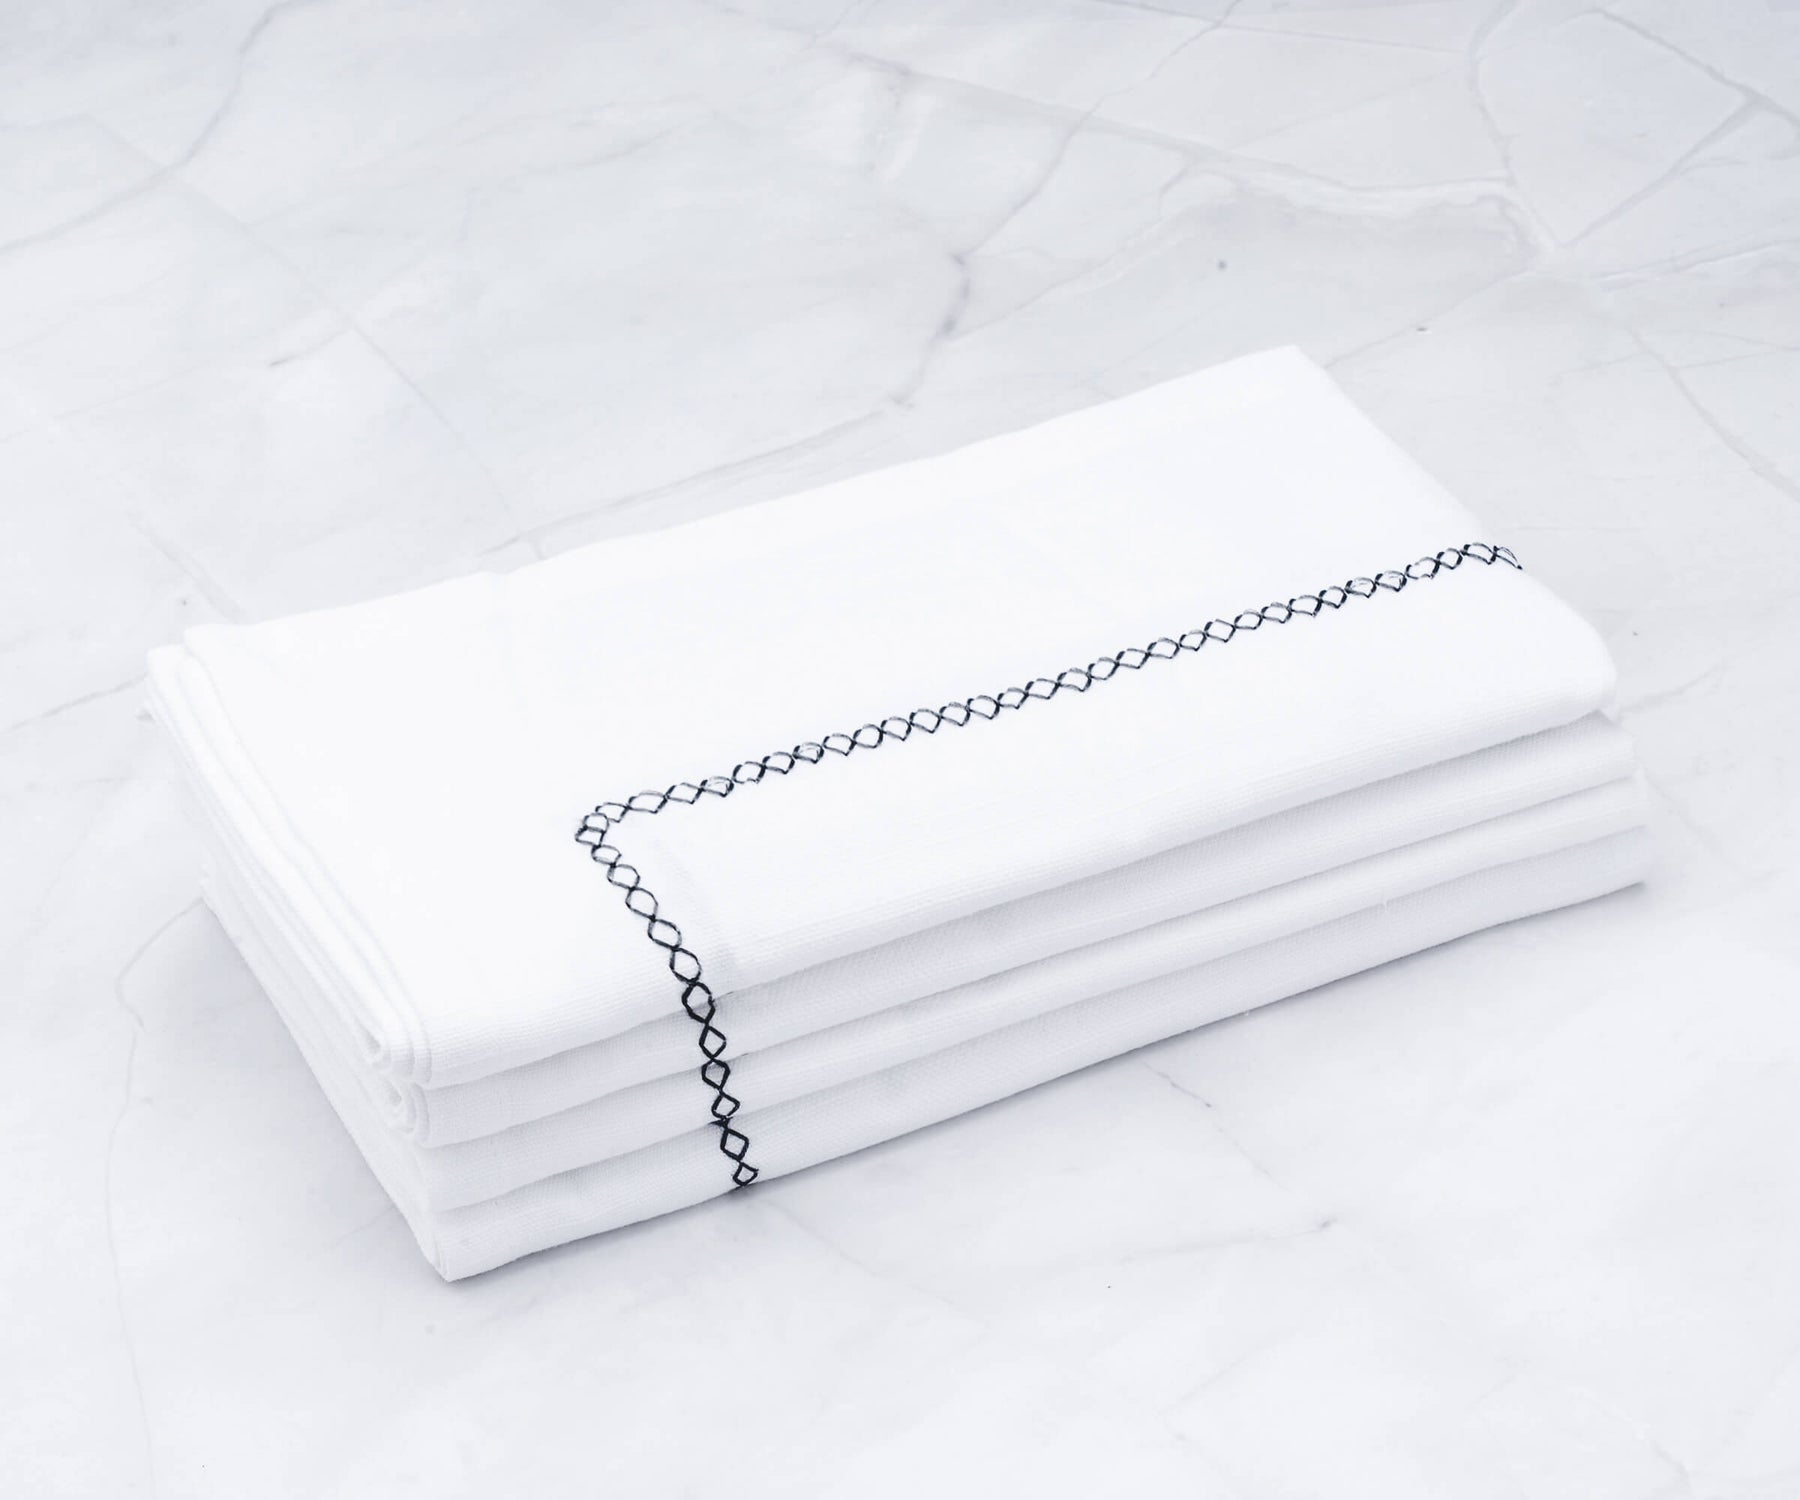  There are cloth dinner napkins, Vanity Fair dinner napkins, neatly folded dinner napkins, white cotton napkins, and instructions on how to fold napkins for dinner.